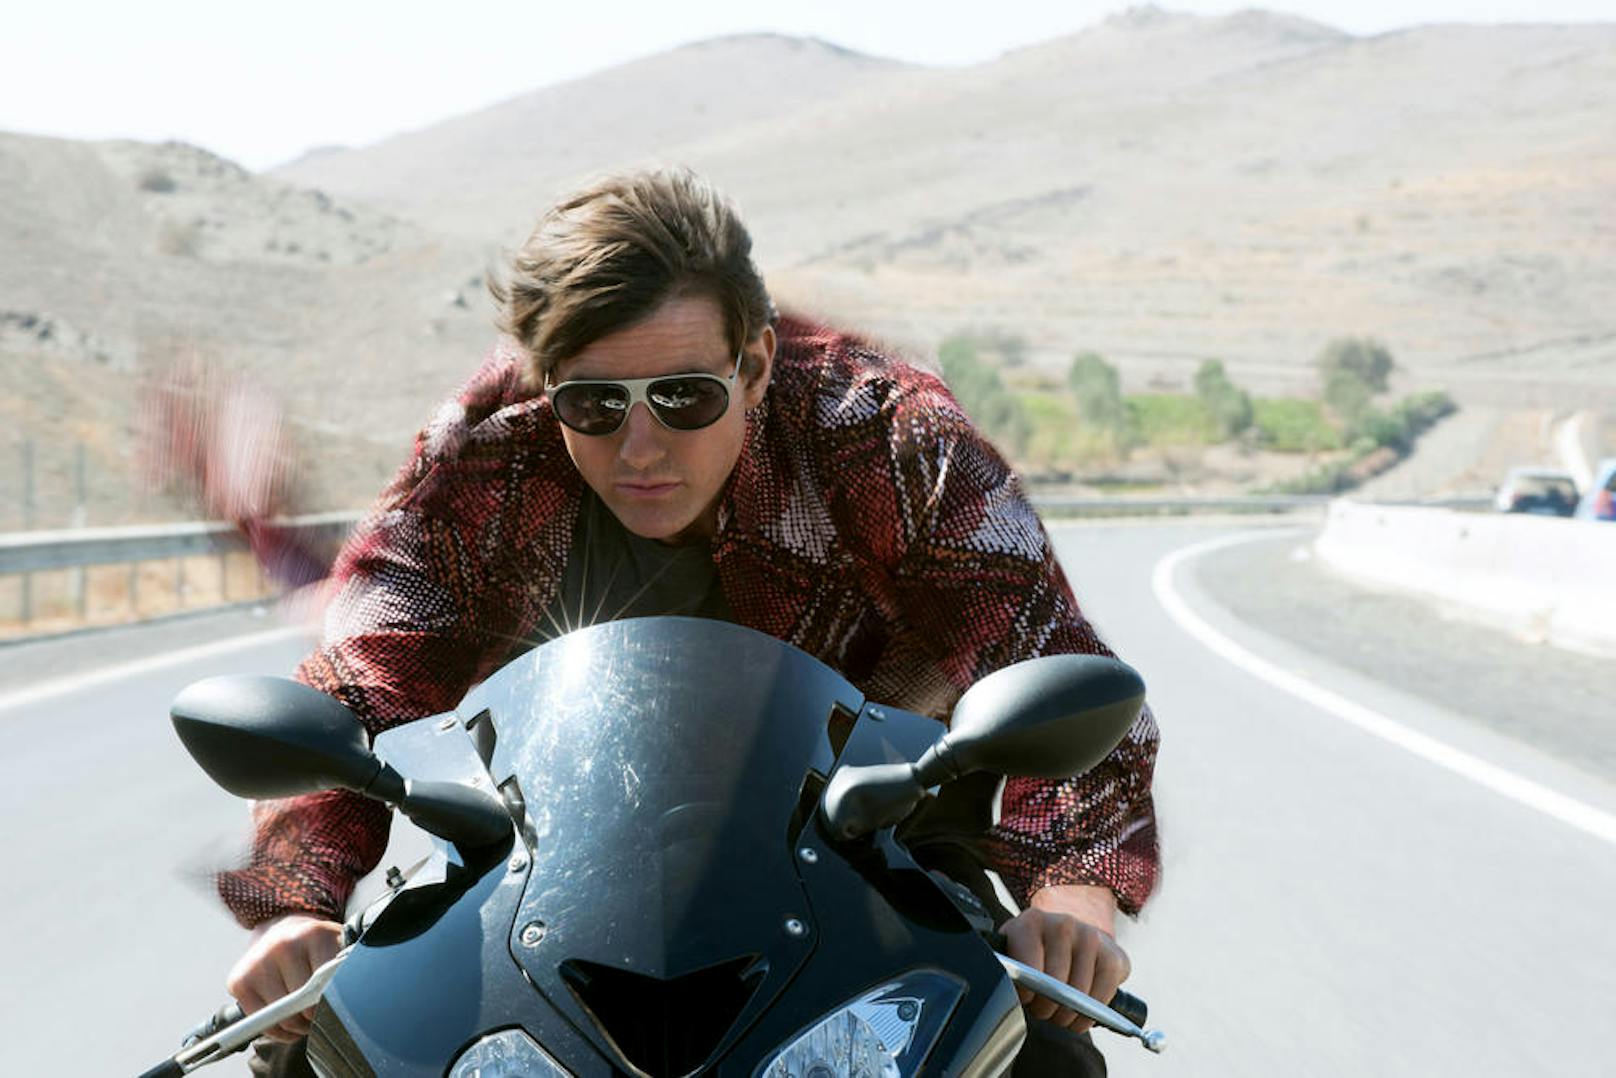 Tom Cruise in "Mission: Impossible - Rogue Nation" 